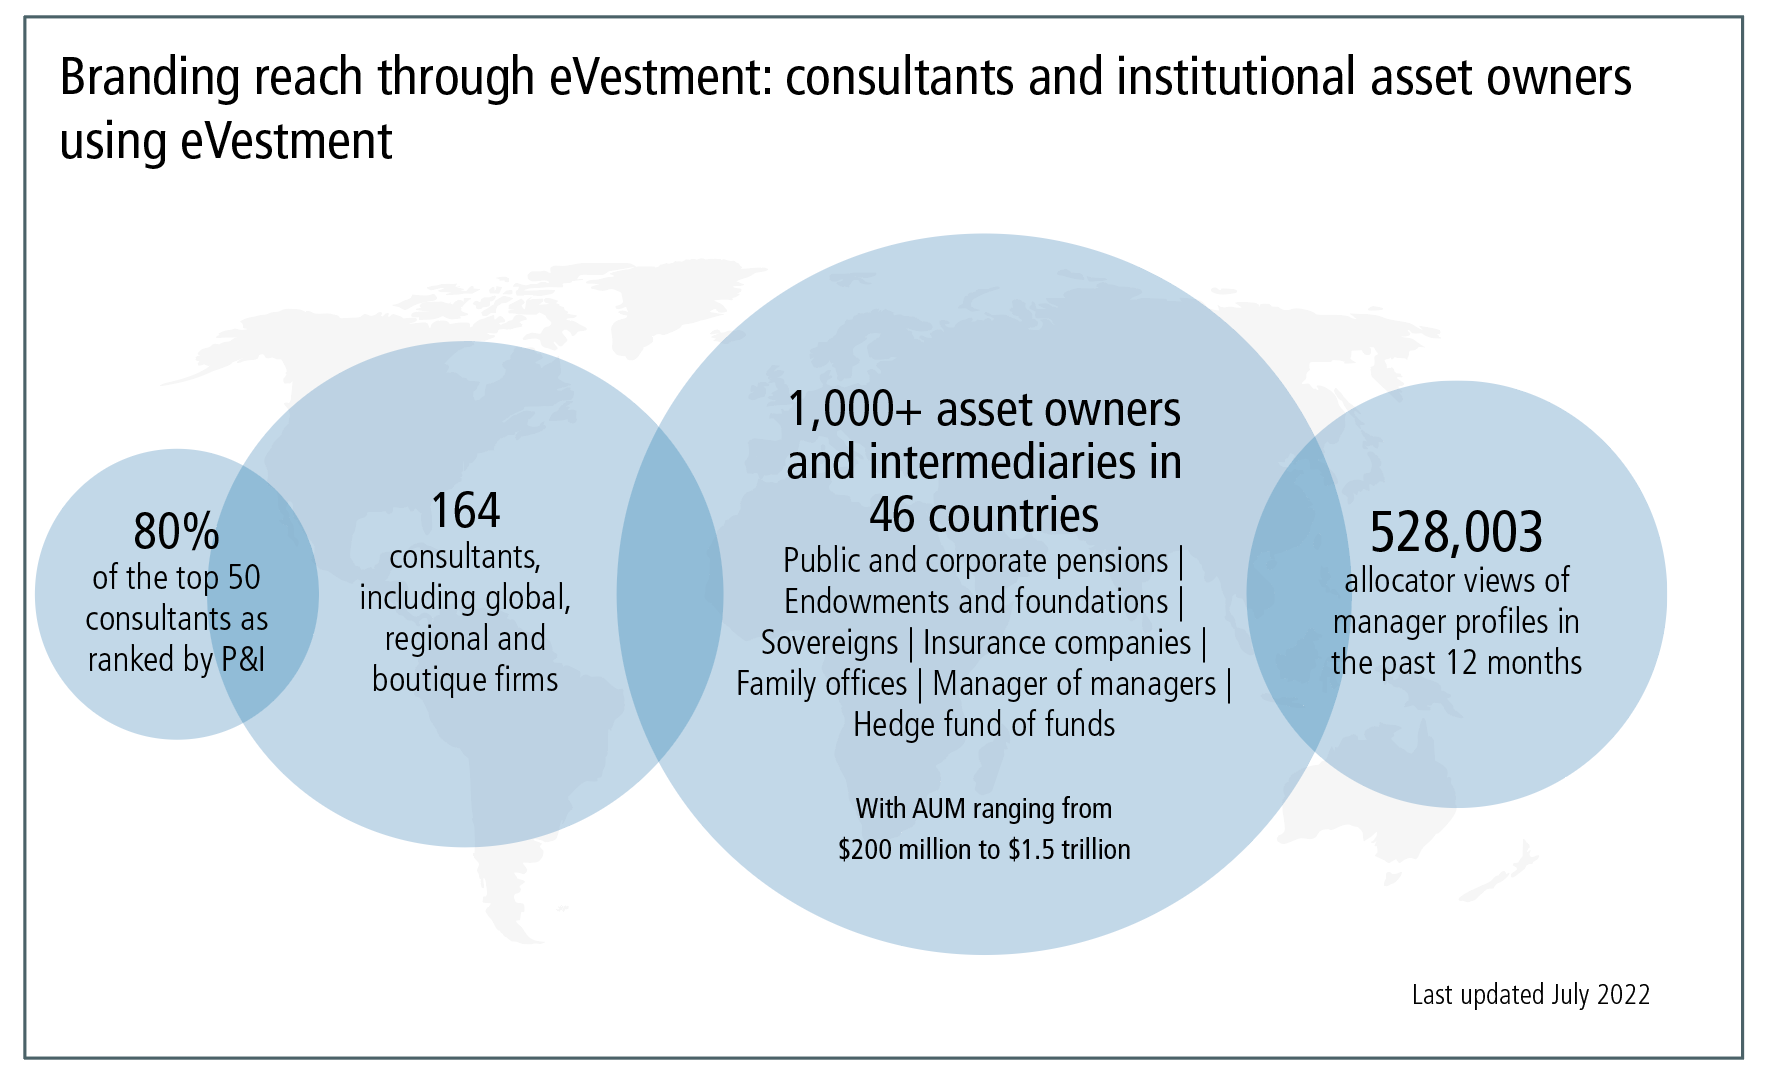 Branding reach through eVestment: consultants and institutional asset owners using eVestment